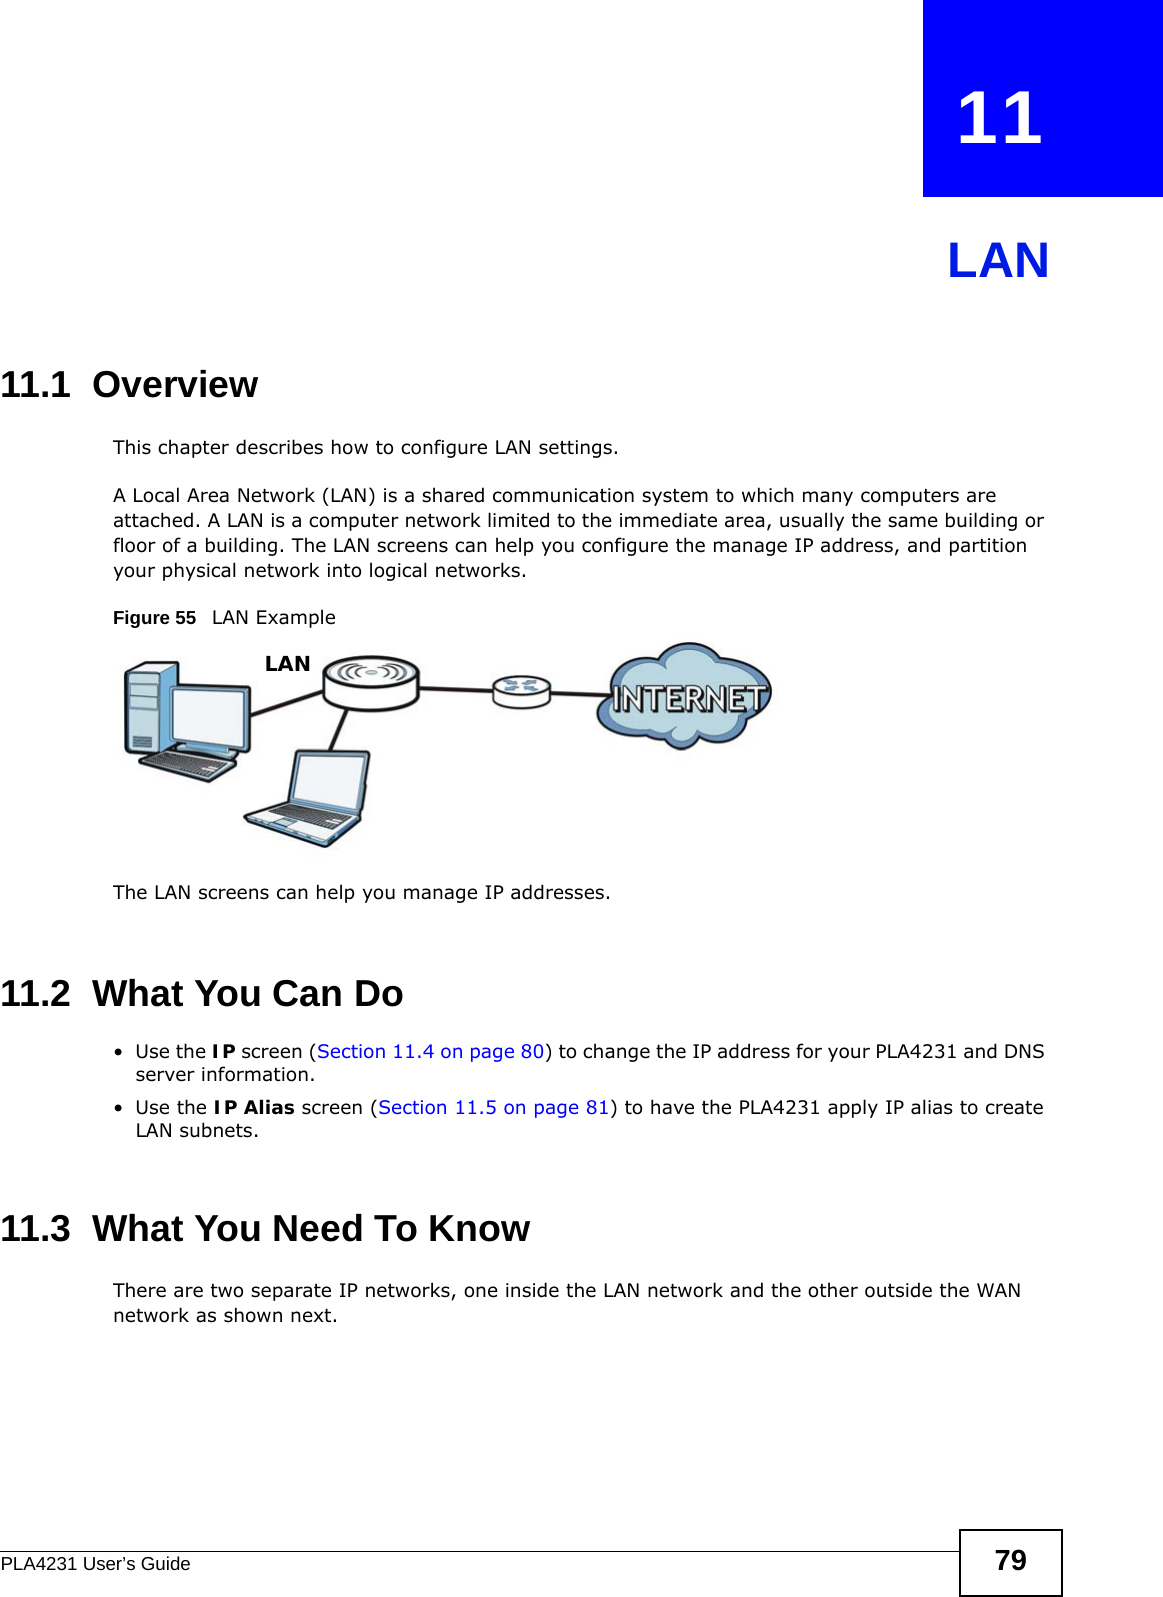 PLA4231 User’s Guide 79CHAPTER   11LAN11.1  OverviewThis chapter describes how to configure LAN settings.A Local Area Network (LAN) is a shared communication system to which many computers are attached. A LAN is a computer network limited to the immediate area, usually the same building or floor of a building. The LAN screens can help you configure the manage IP address, and partition your physical network into logical networks.Figure 55   LAN ExampleThe LAN screens can help you manage IP addresses.11.2  What You Can Do•Use the IP screen (Section 11.4 on page 80) to change the IP address for your PLA4231 and DNS server information.•Use the IP Alias screen (Section 11.5 on page 81) to have the PLA4231 apply IP alias to create LAN subnets.11.3  What You Need To KnowThere are two separate IP networks, one inside the LAN network and the other outside the WAN network as shown next.LAN